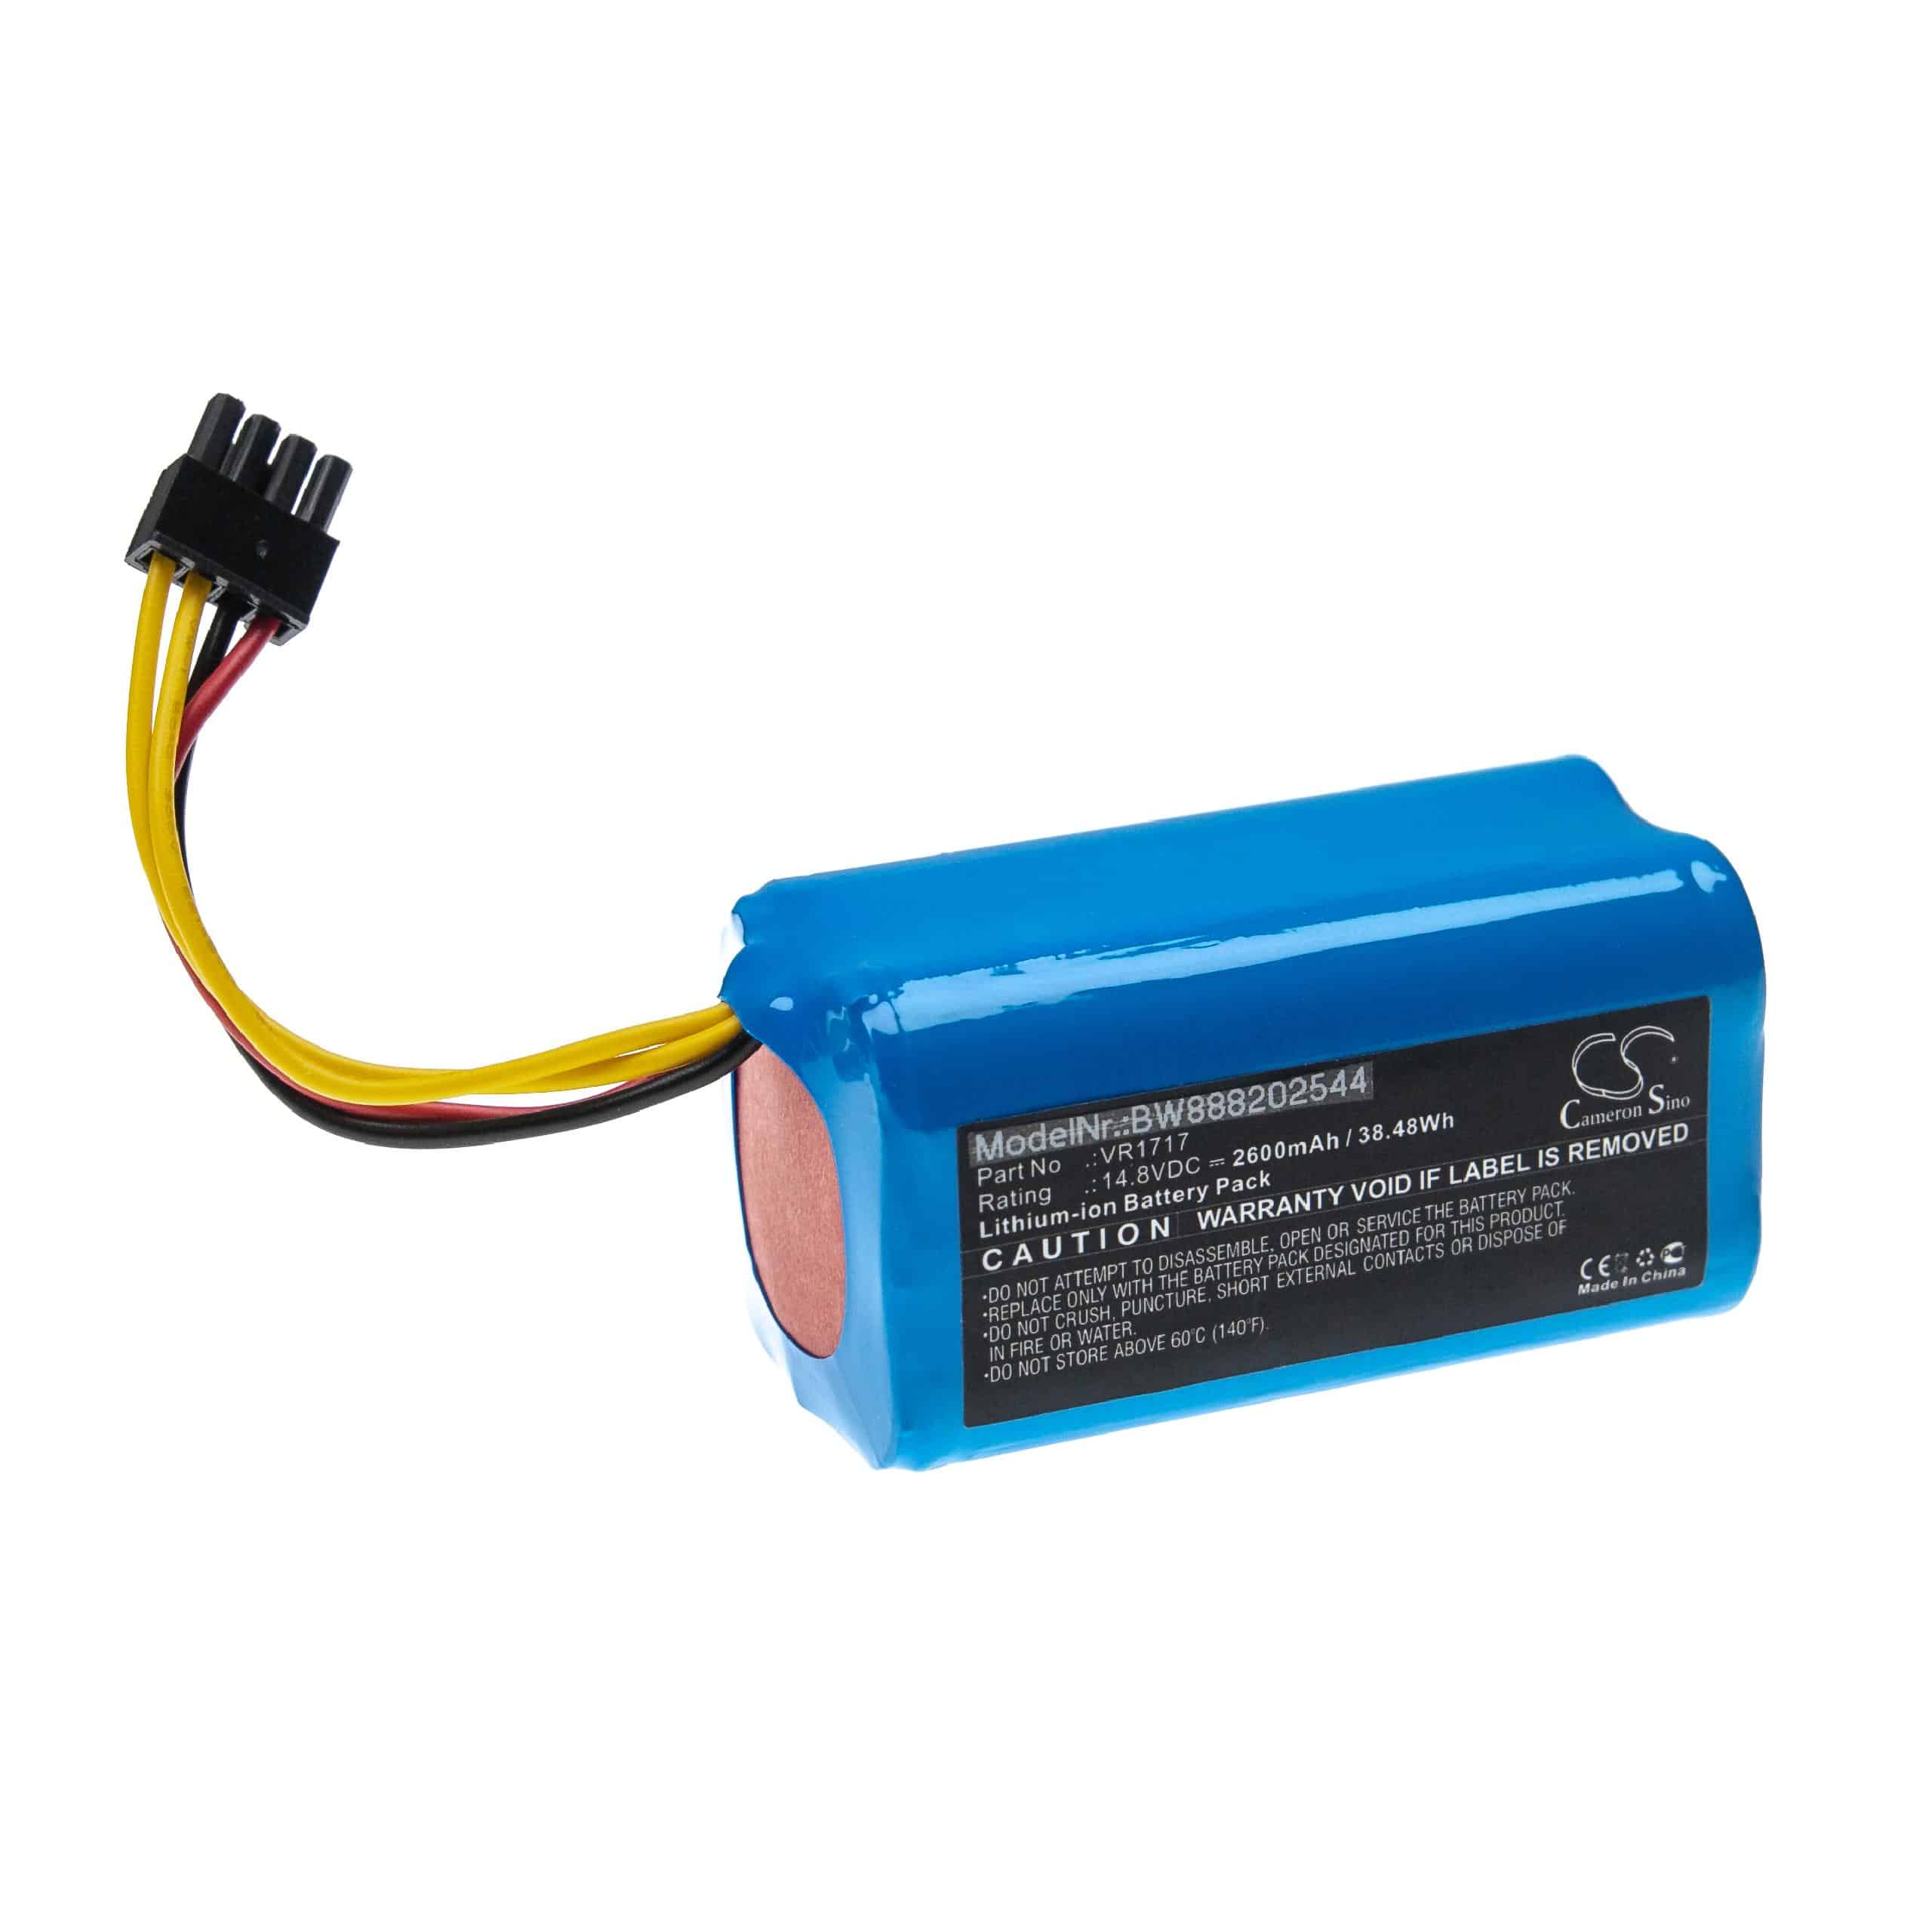 Battery Replacement for Proscenic VR1717 for - 2600mAh, 14.8V, Li-Ion